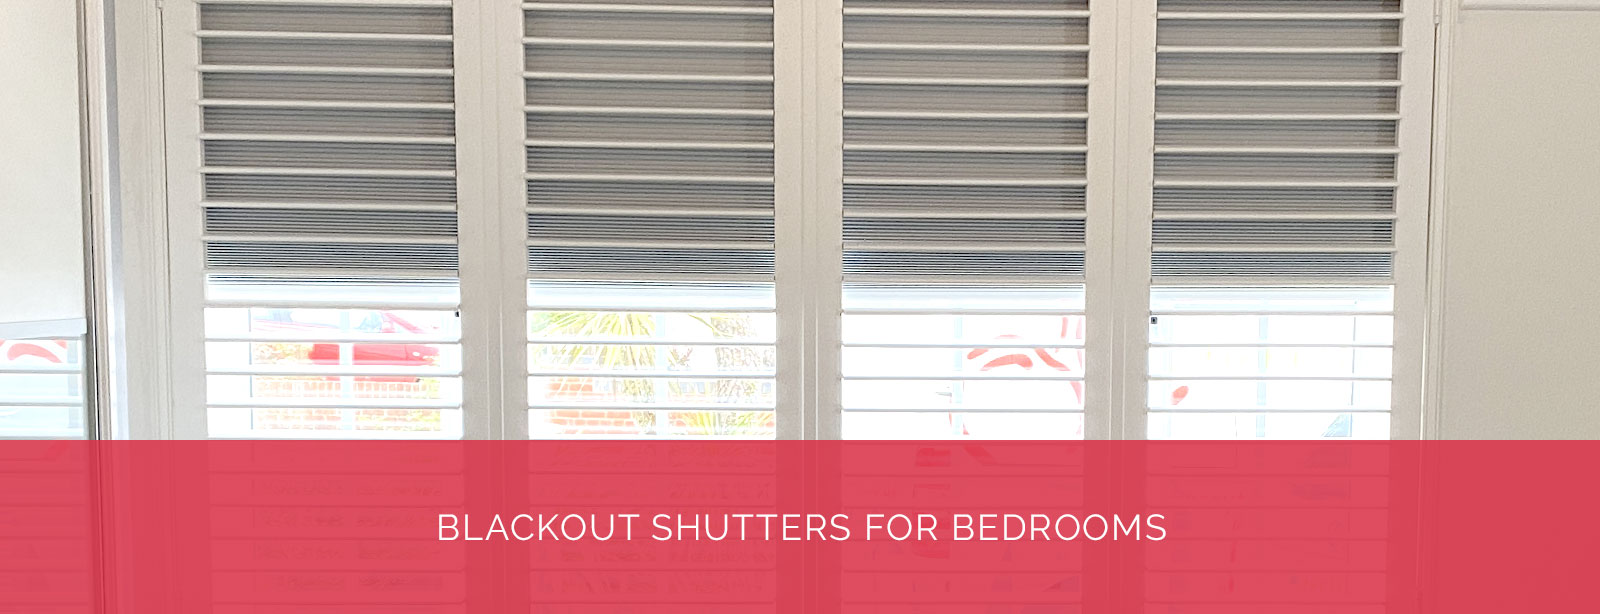 Blackout Shutters For Bedrooms